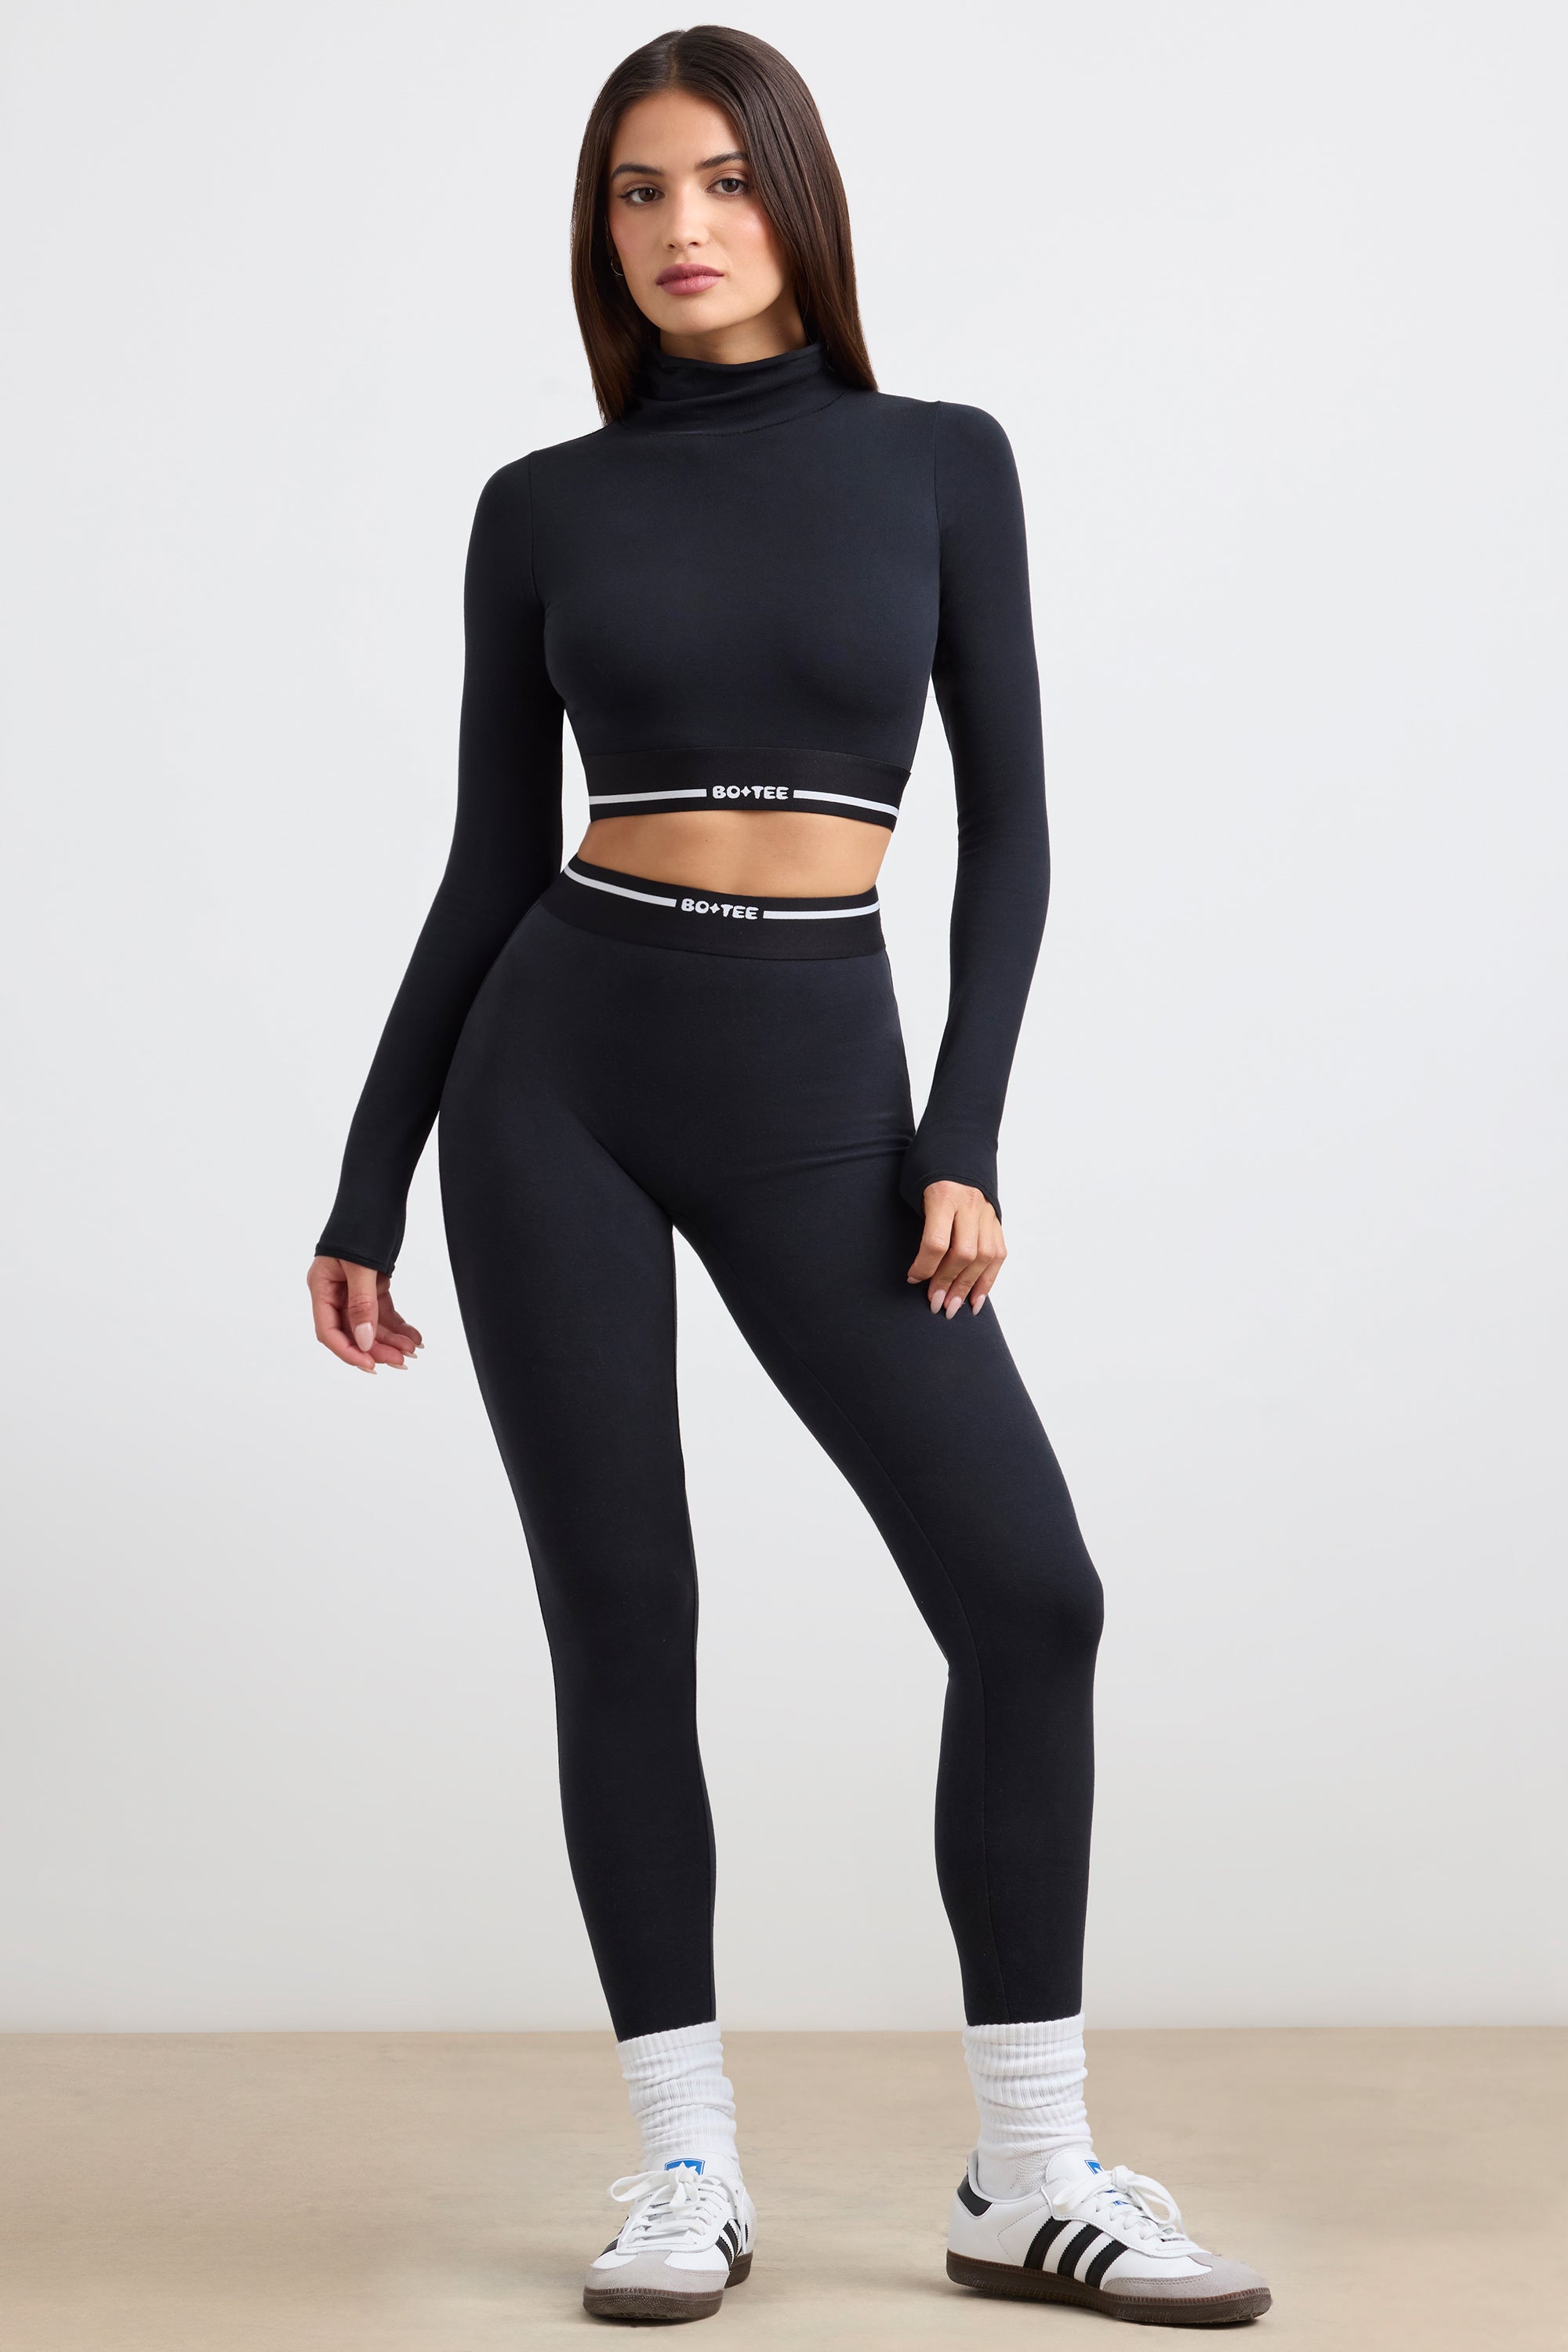 Go Move High Waisted Cropped Gym Leggings